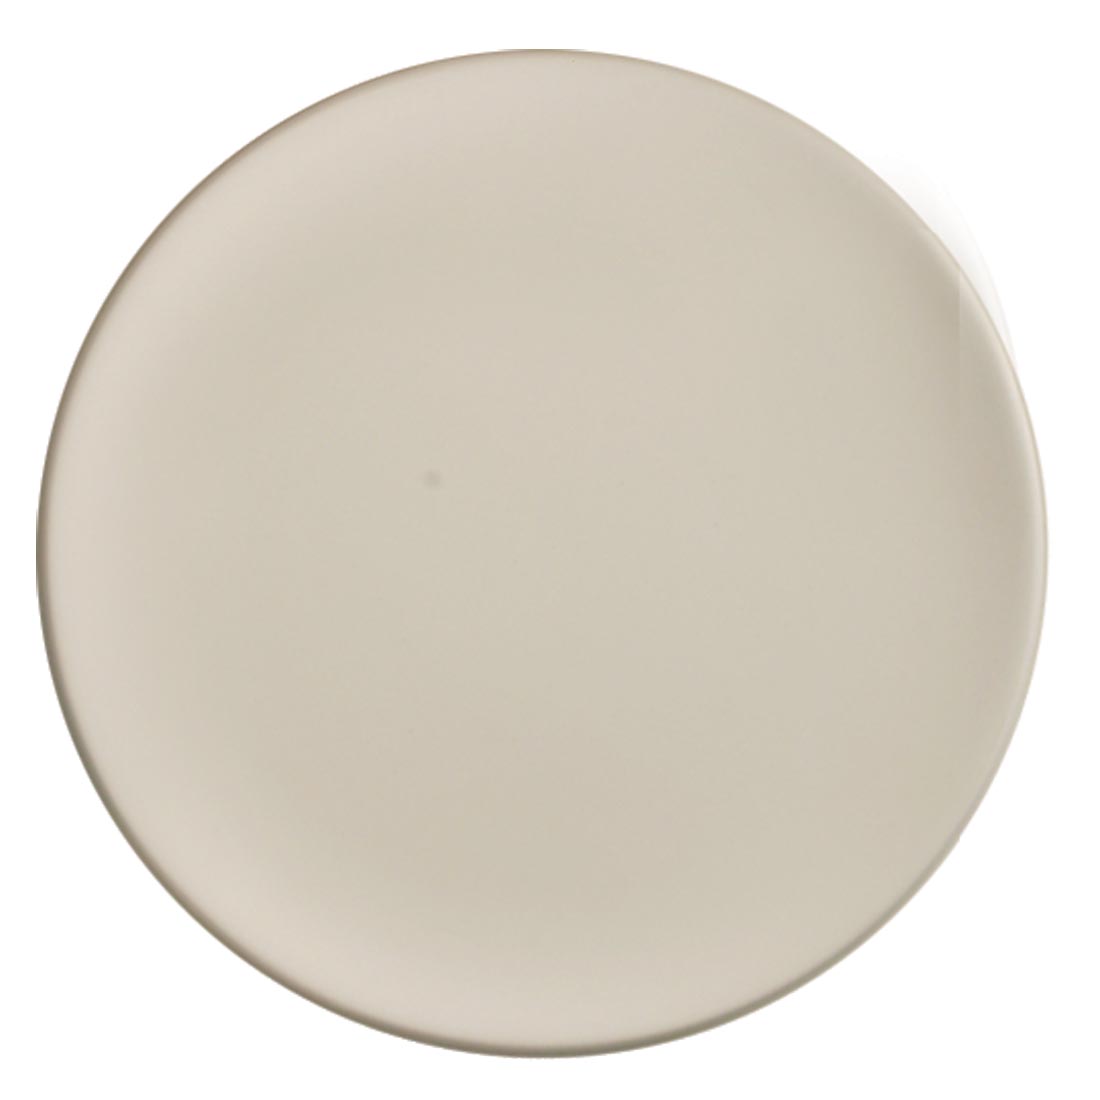 Mayco Bisque Dinner Plate